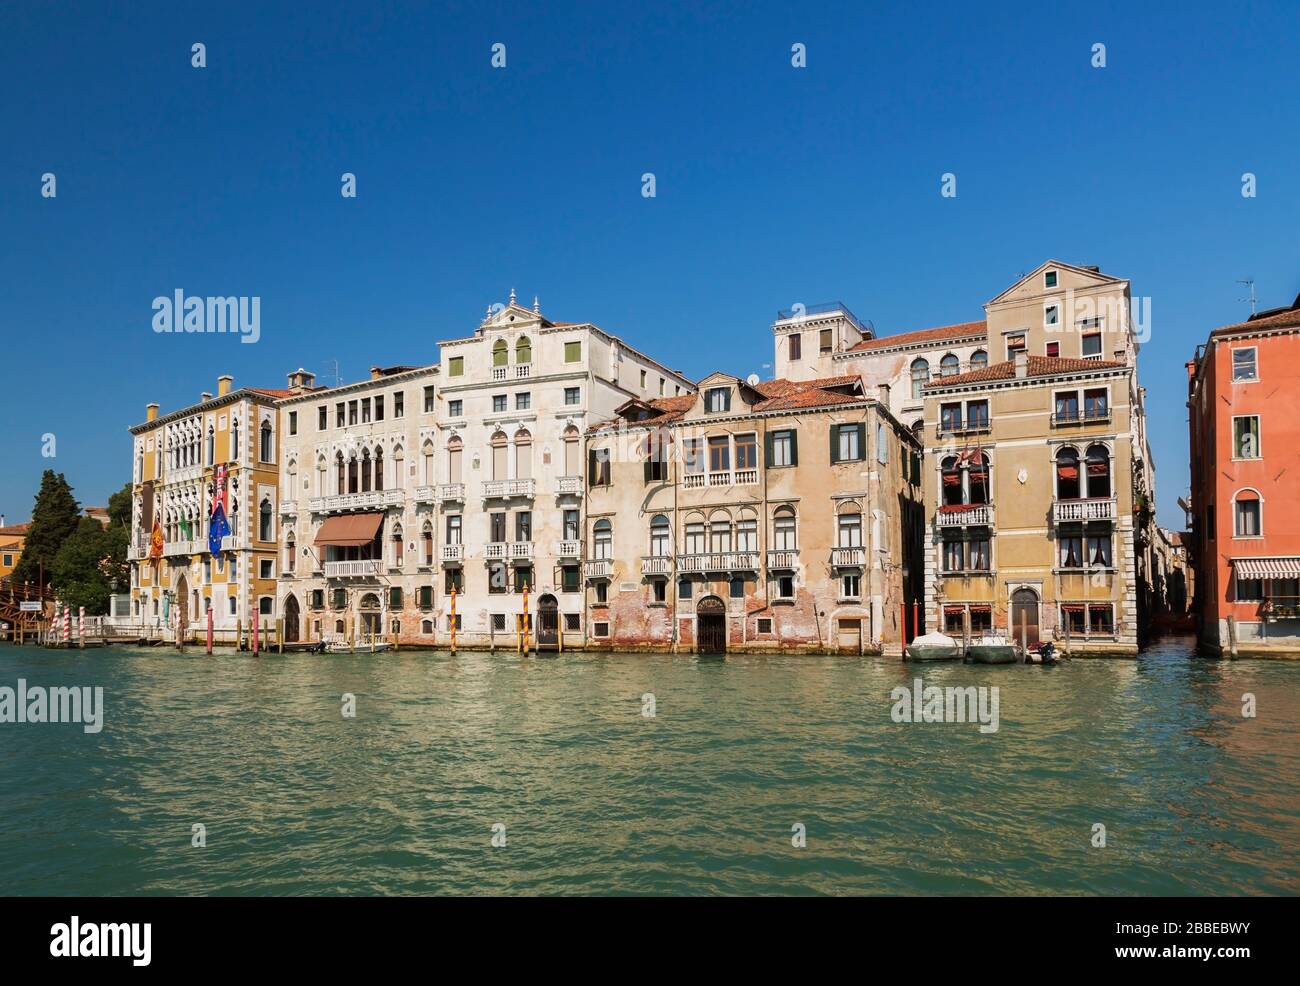 Grand Canal and moored boats in front of Renaissance architectural style palace buildings including the Palazzo Cavalli-Franchetti palace, San Marco, Venice, Veneto, Italy Stock Photo